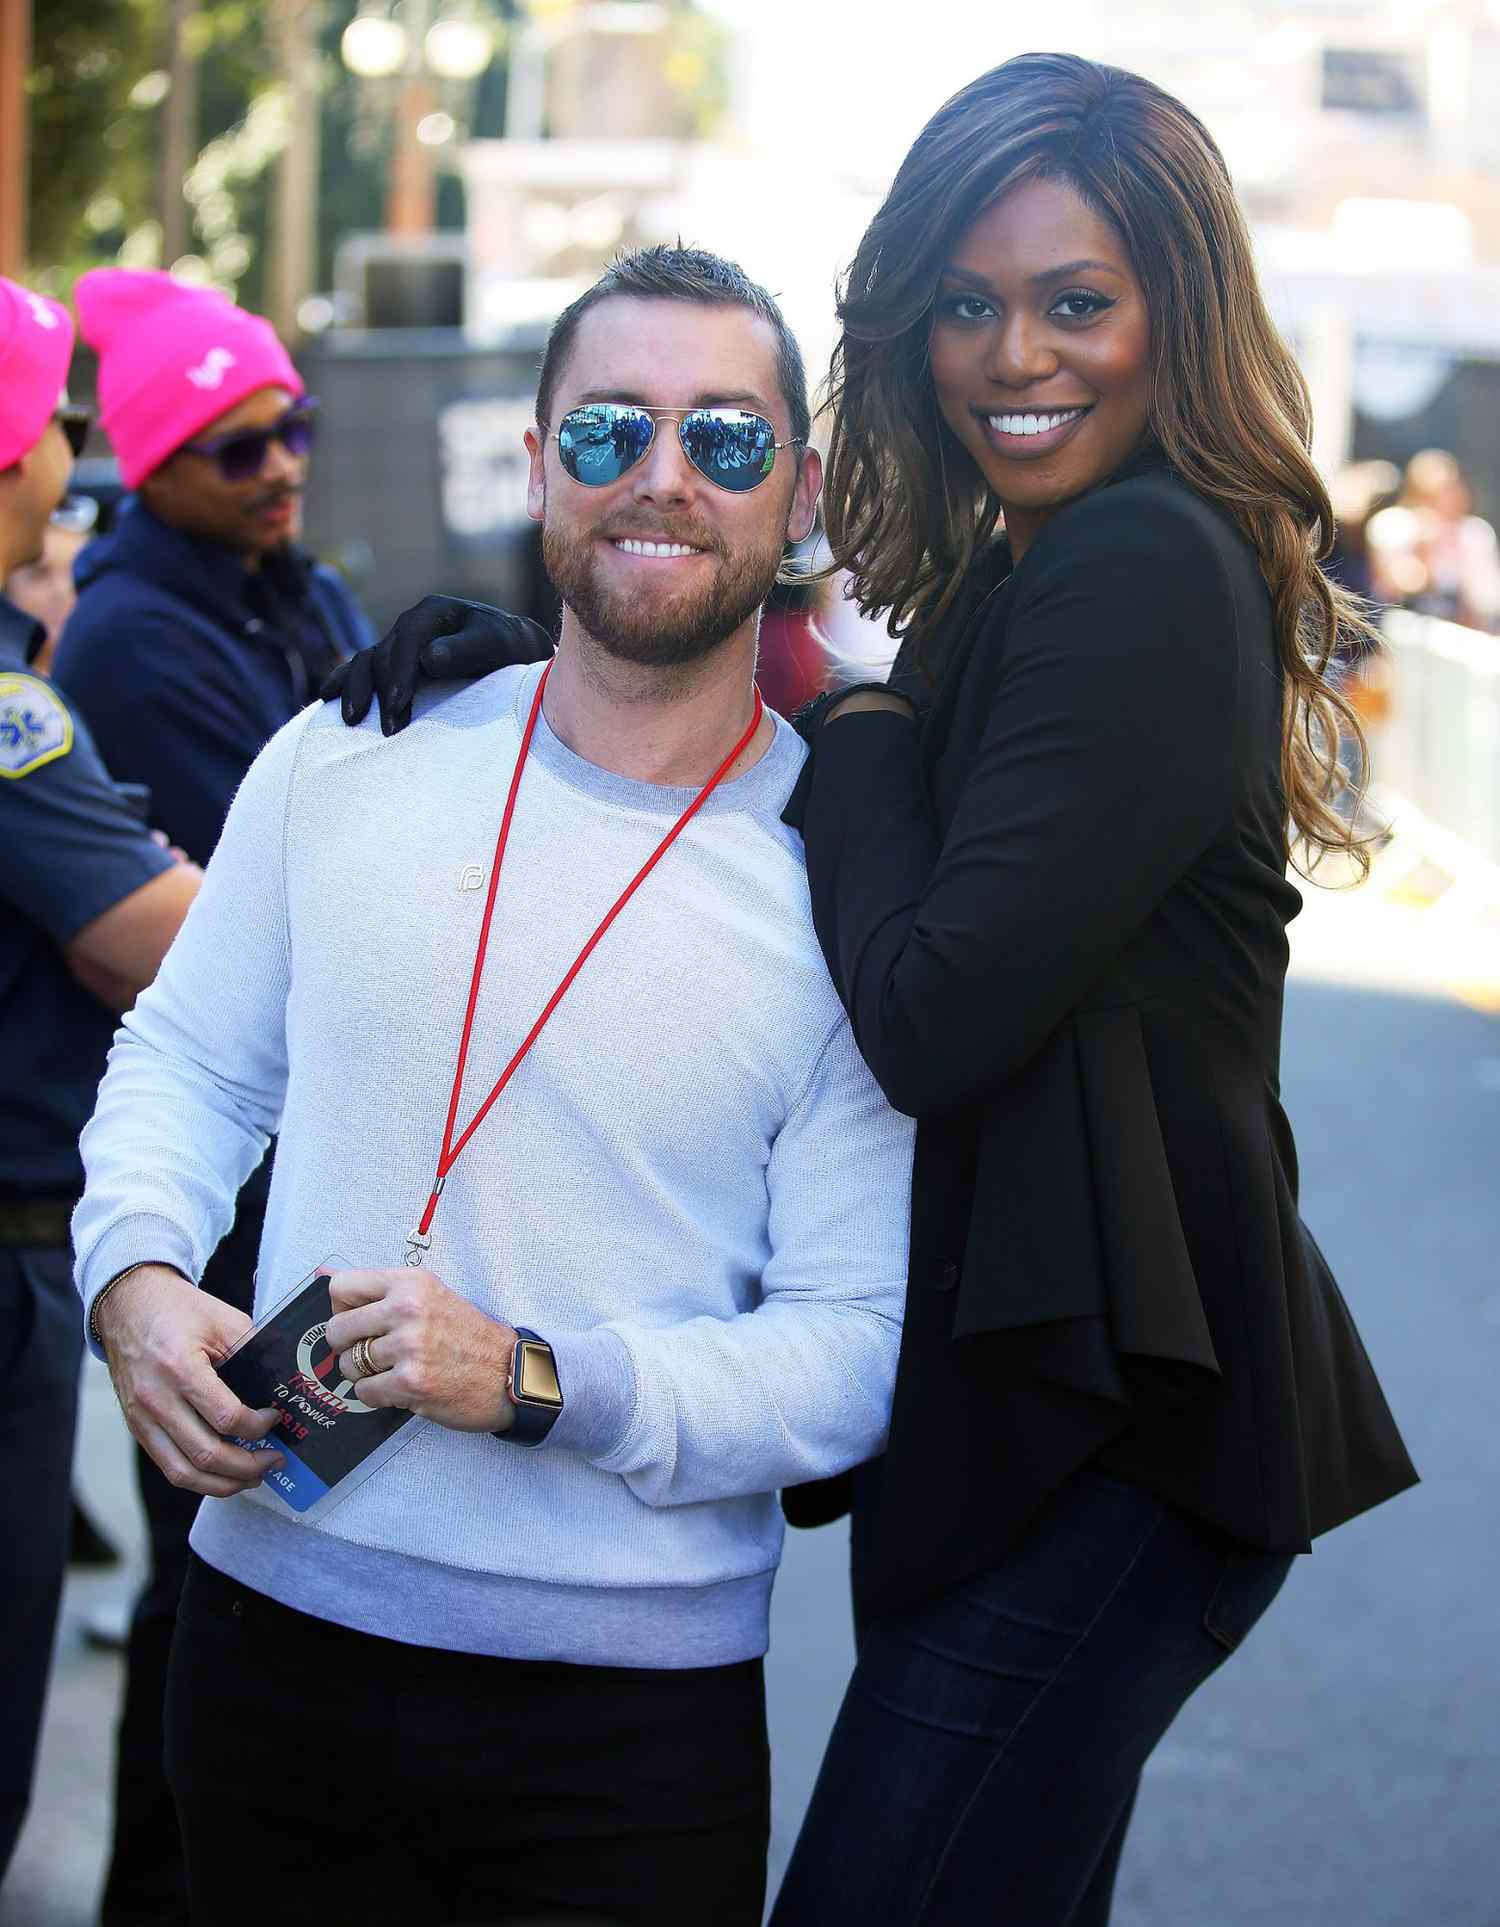 Lance Bass And Laverne Cox Are Seen At 2019 Women's March In Los Angeles